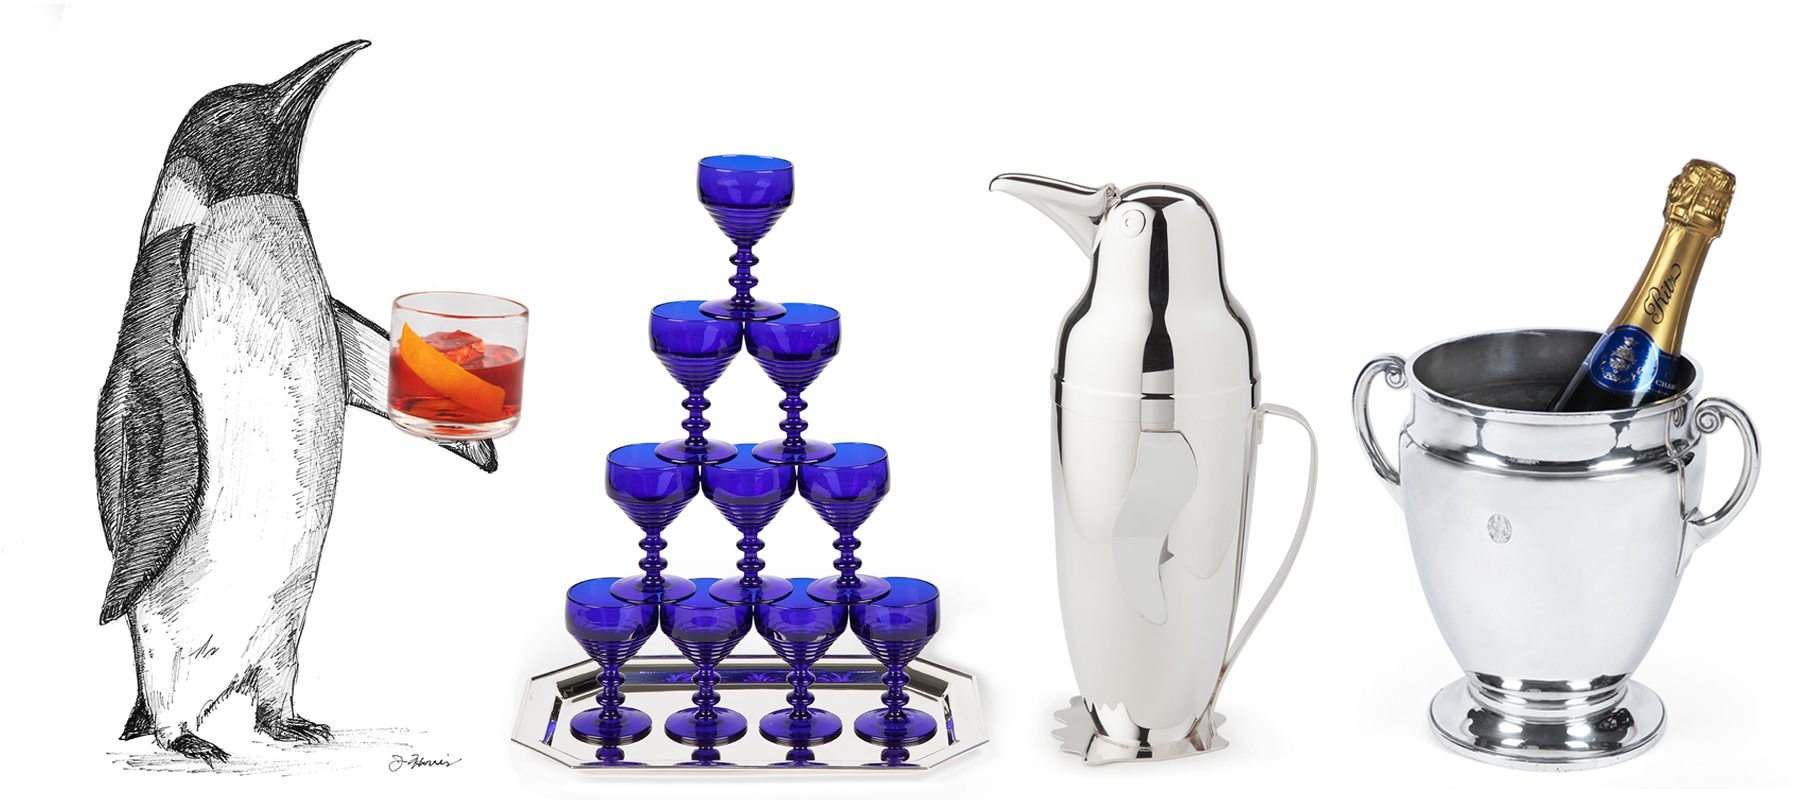 Sir Jack's New Arrivals Luxury Barware and Antique cocktail shakers. The finest antiques and one of a kind collectibles. We ship worldwide.